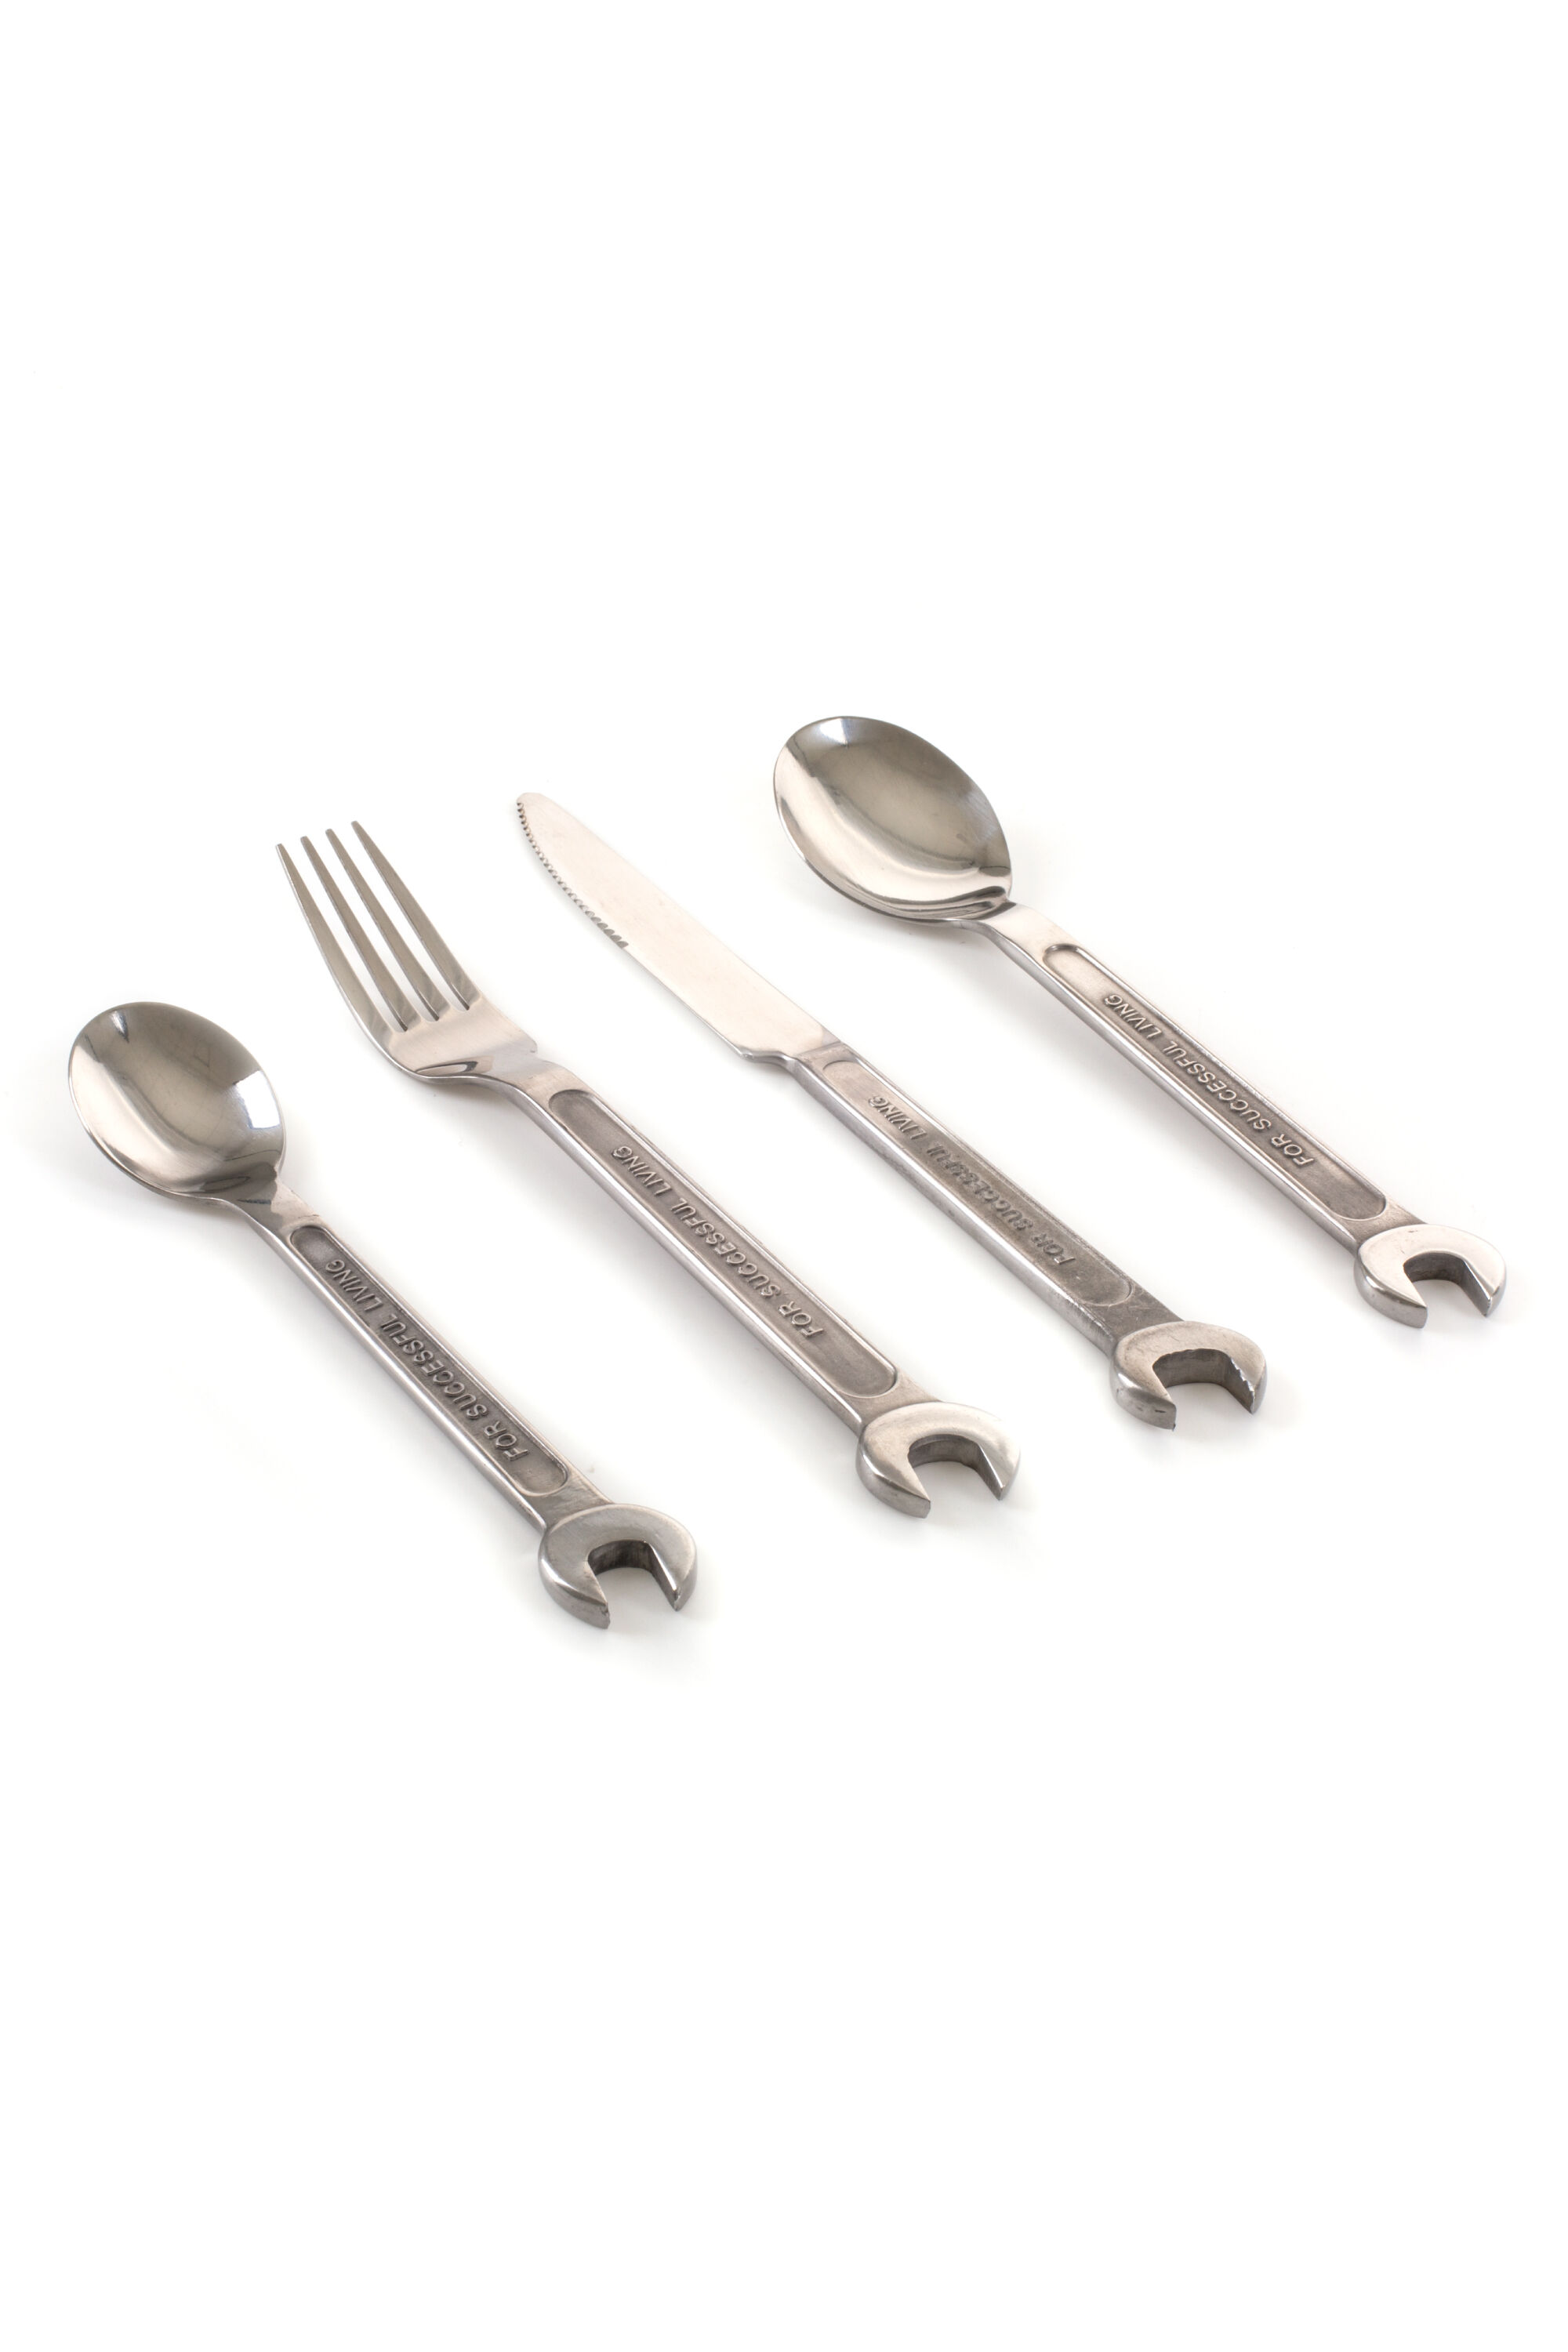 DIESEL LIVING with SELETTI 「Cutlery Set」